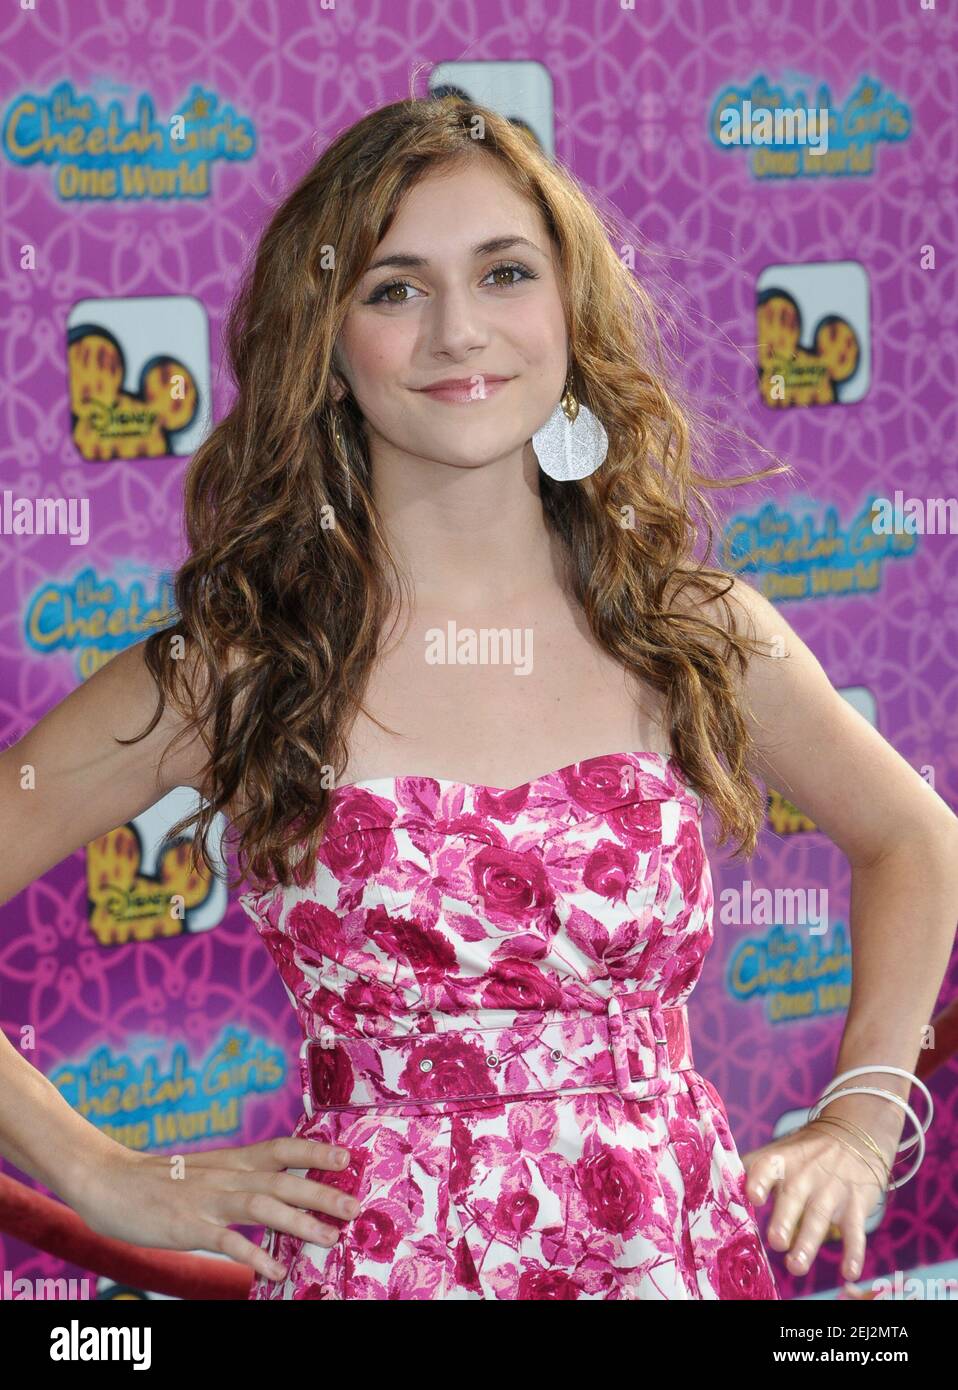 at premiere of The Cheetah Girls One World held at the El Capitan Theater 8,12, 2008 Hollywood, Ca Stock Photo